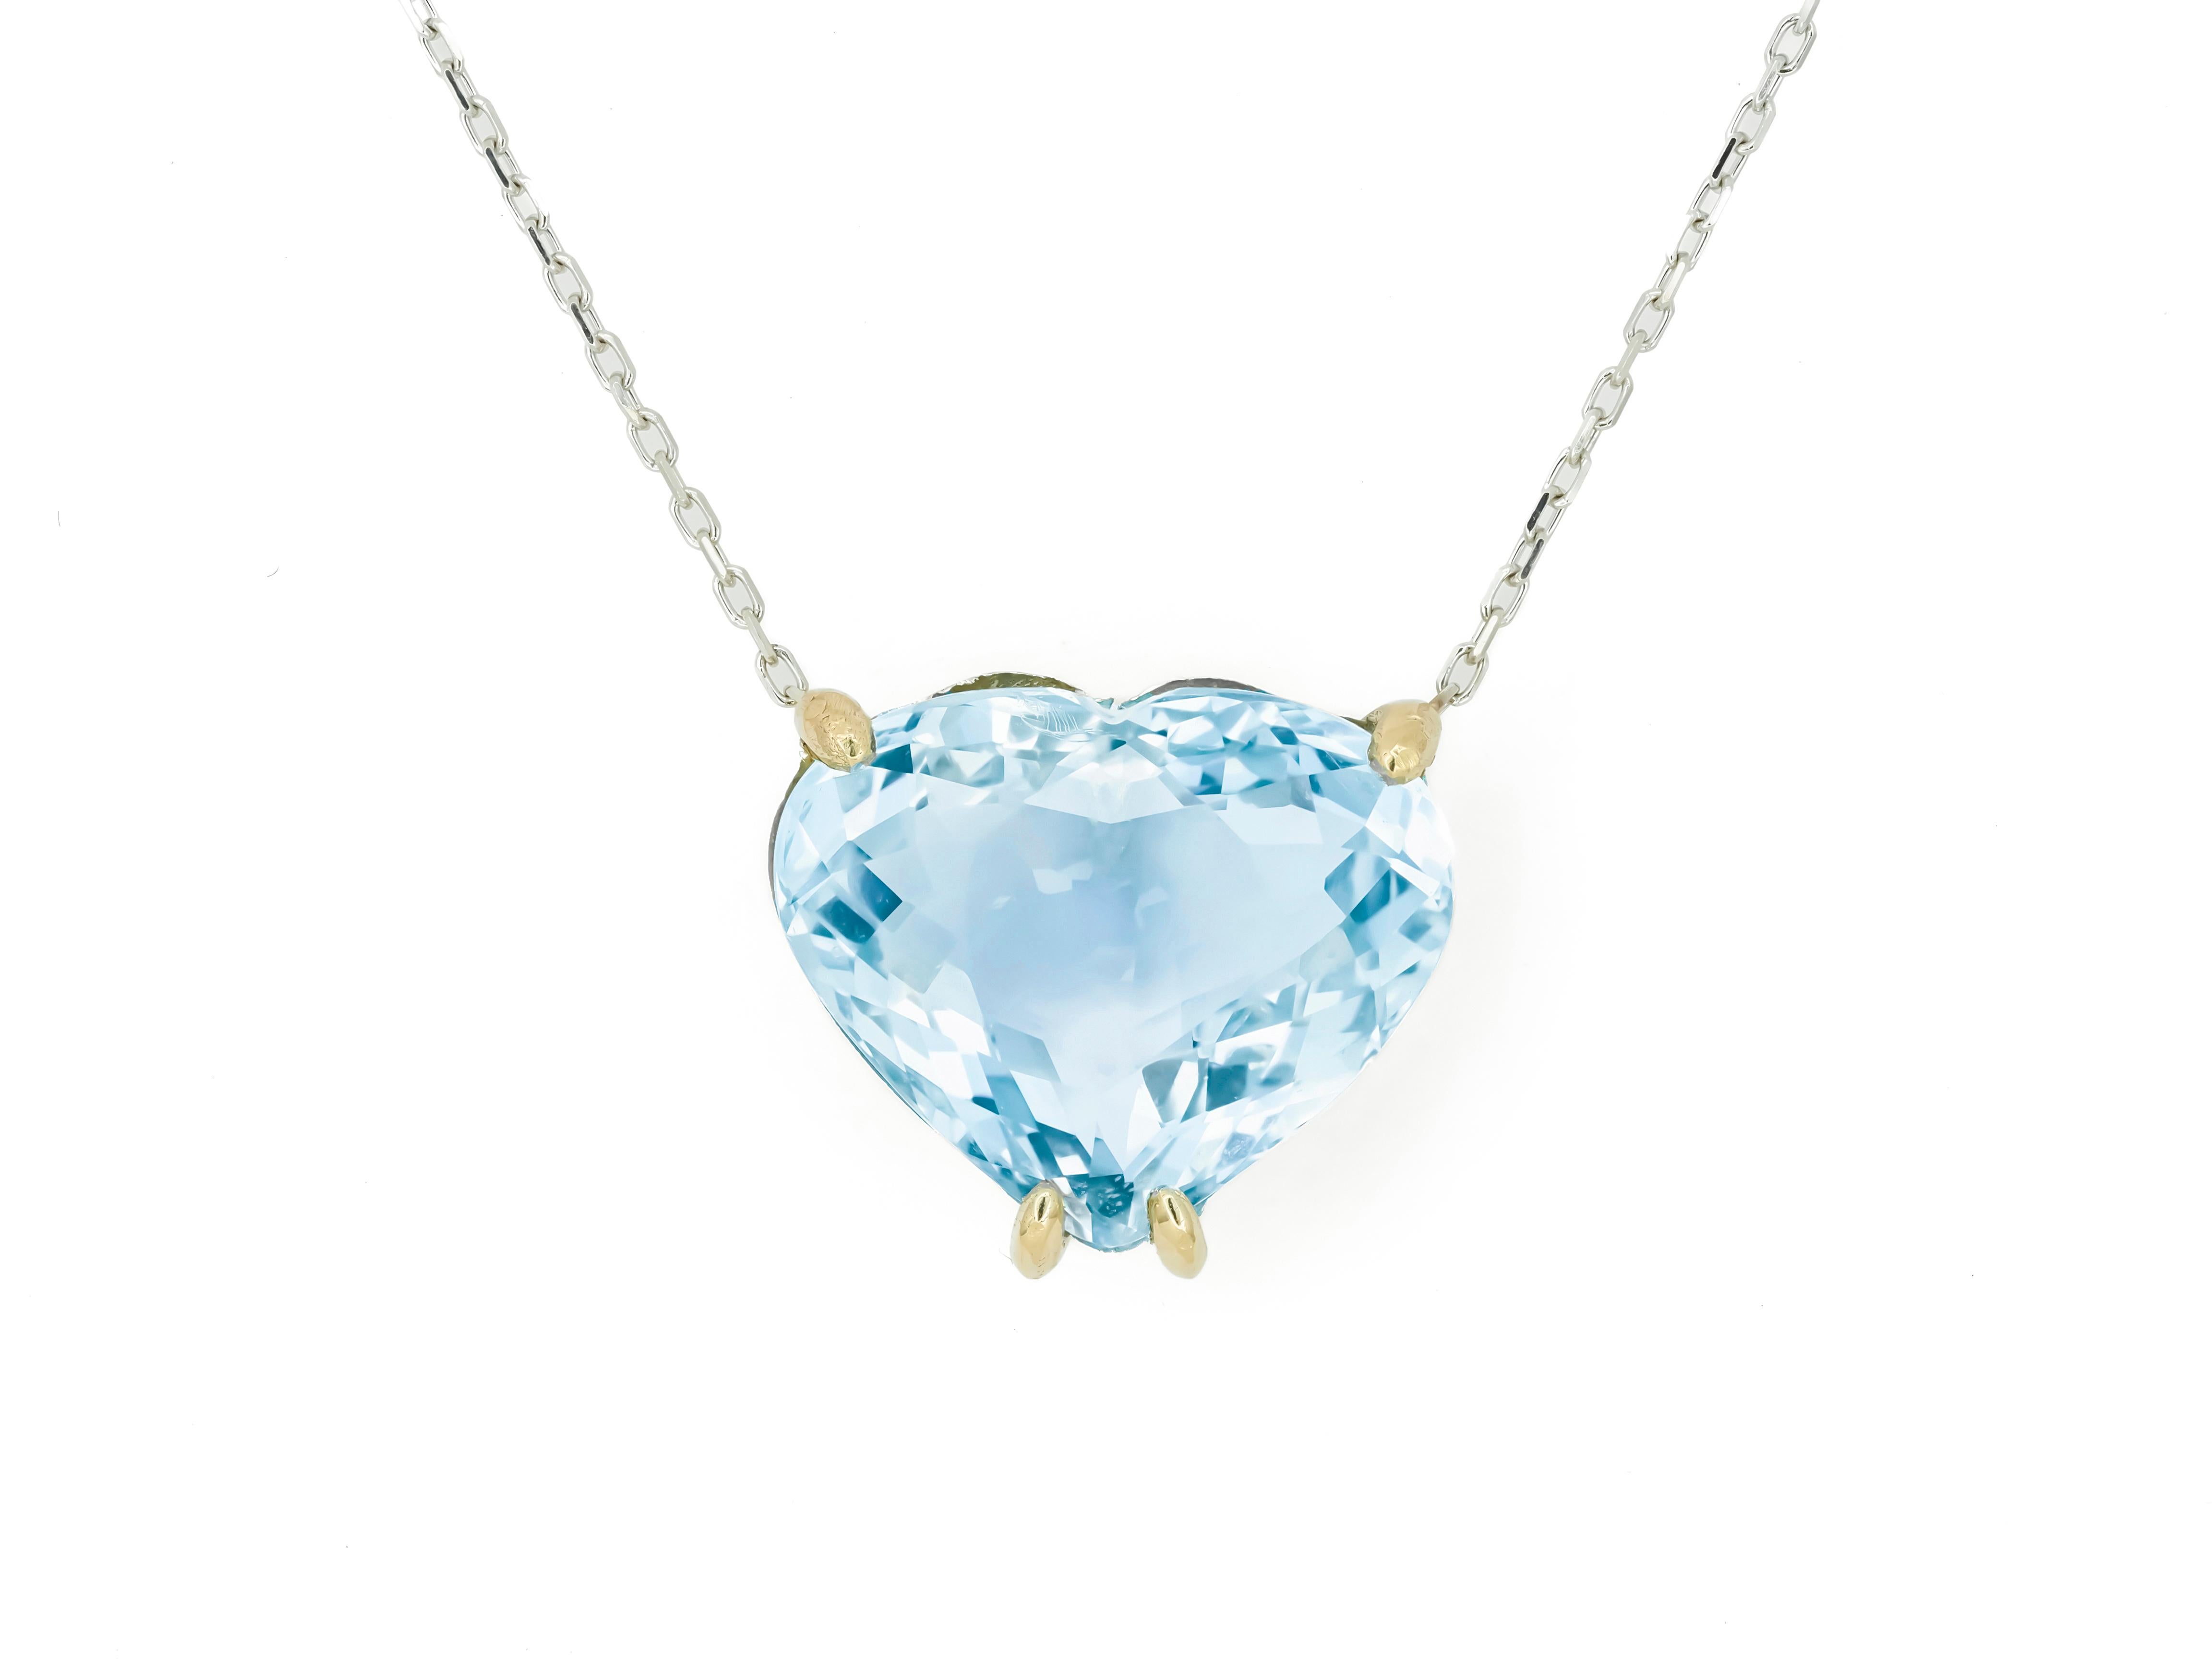 Women's Heart shaped topaz pendant necklace in 14k gold.  For Sale